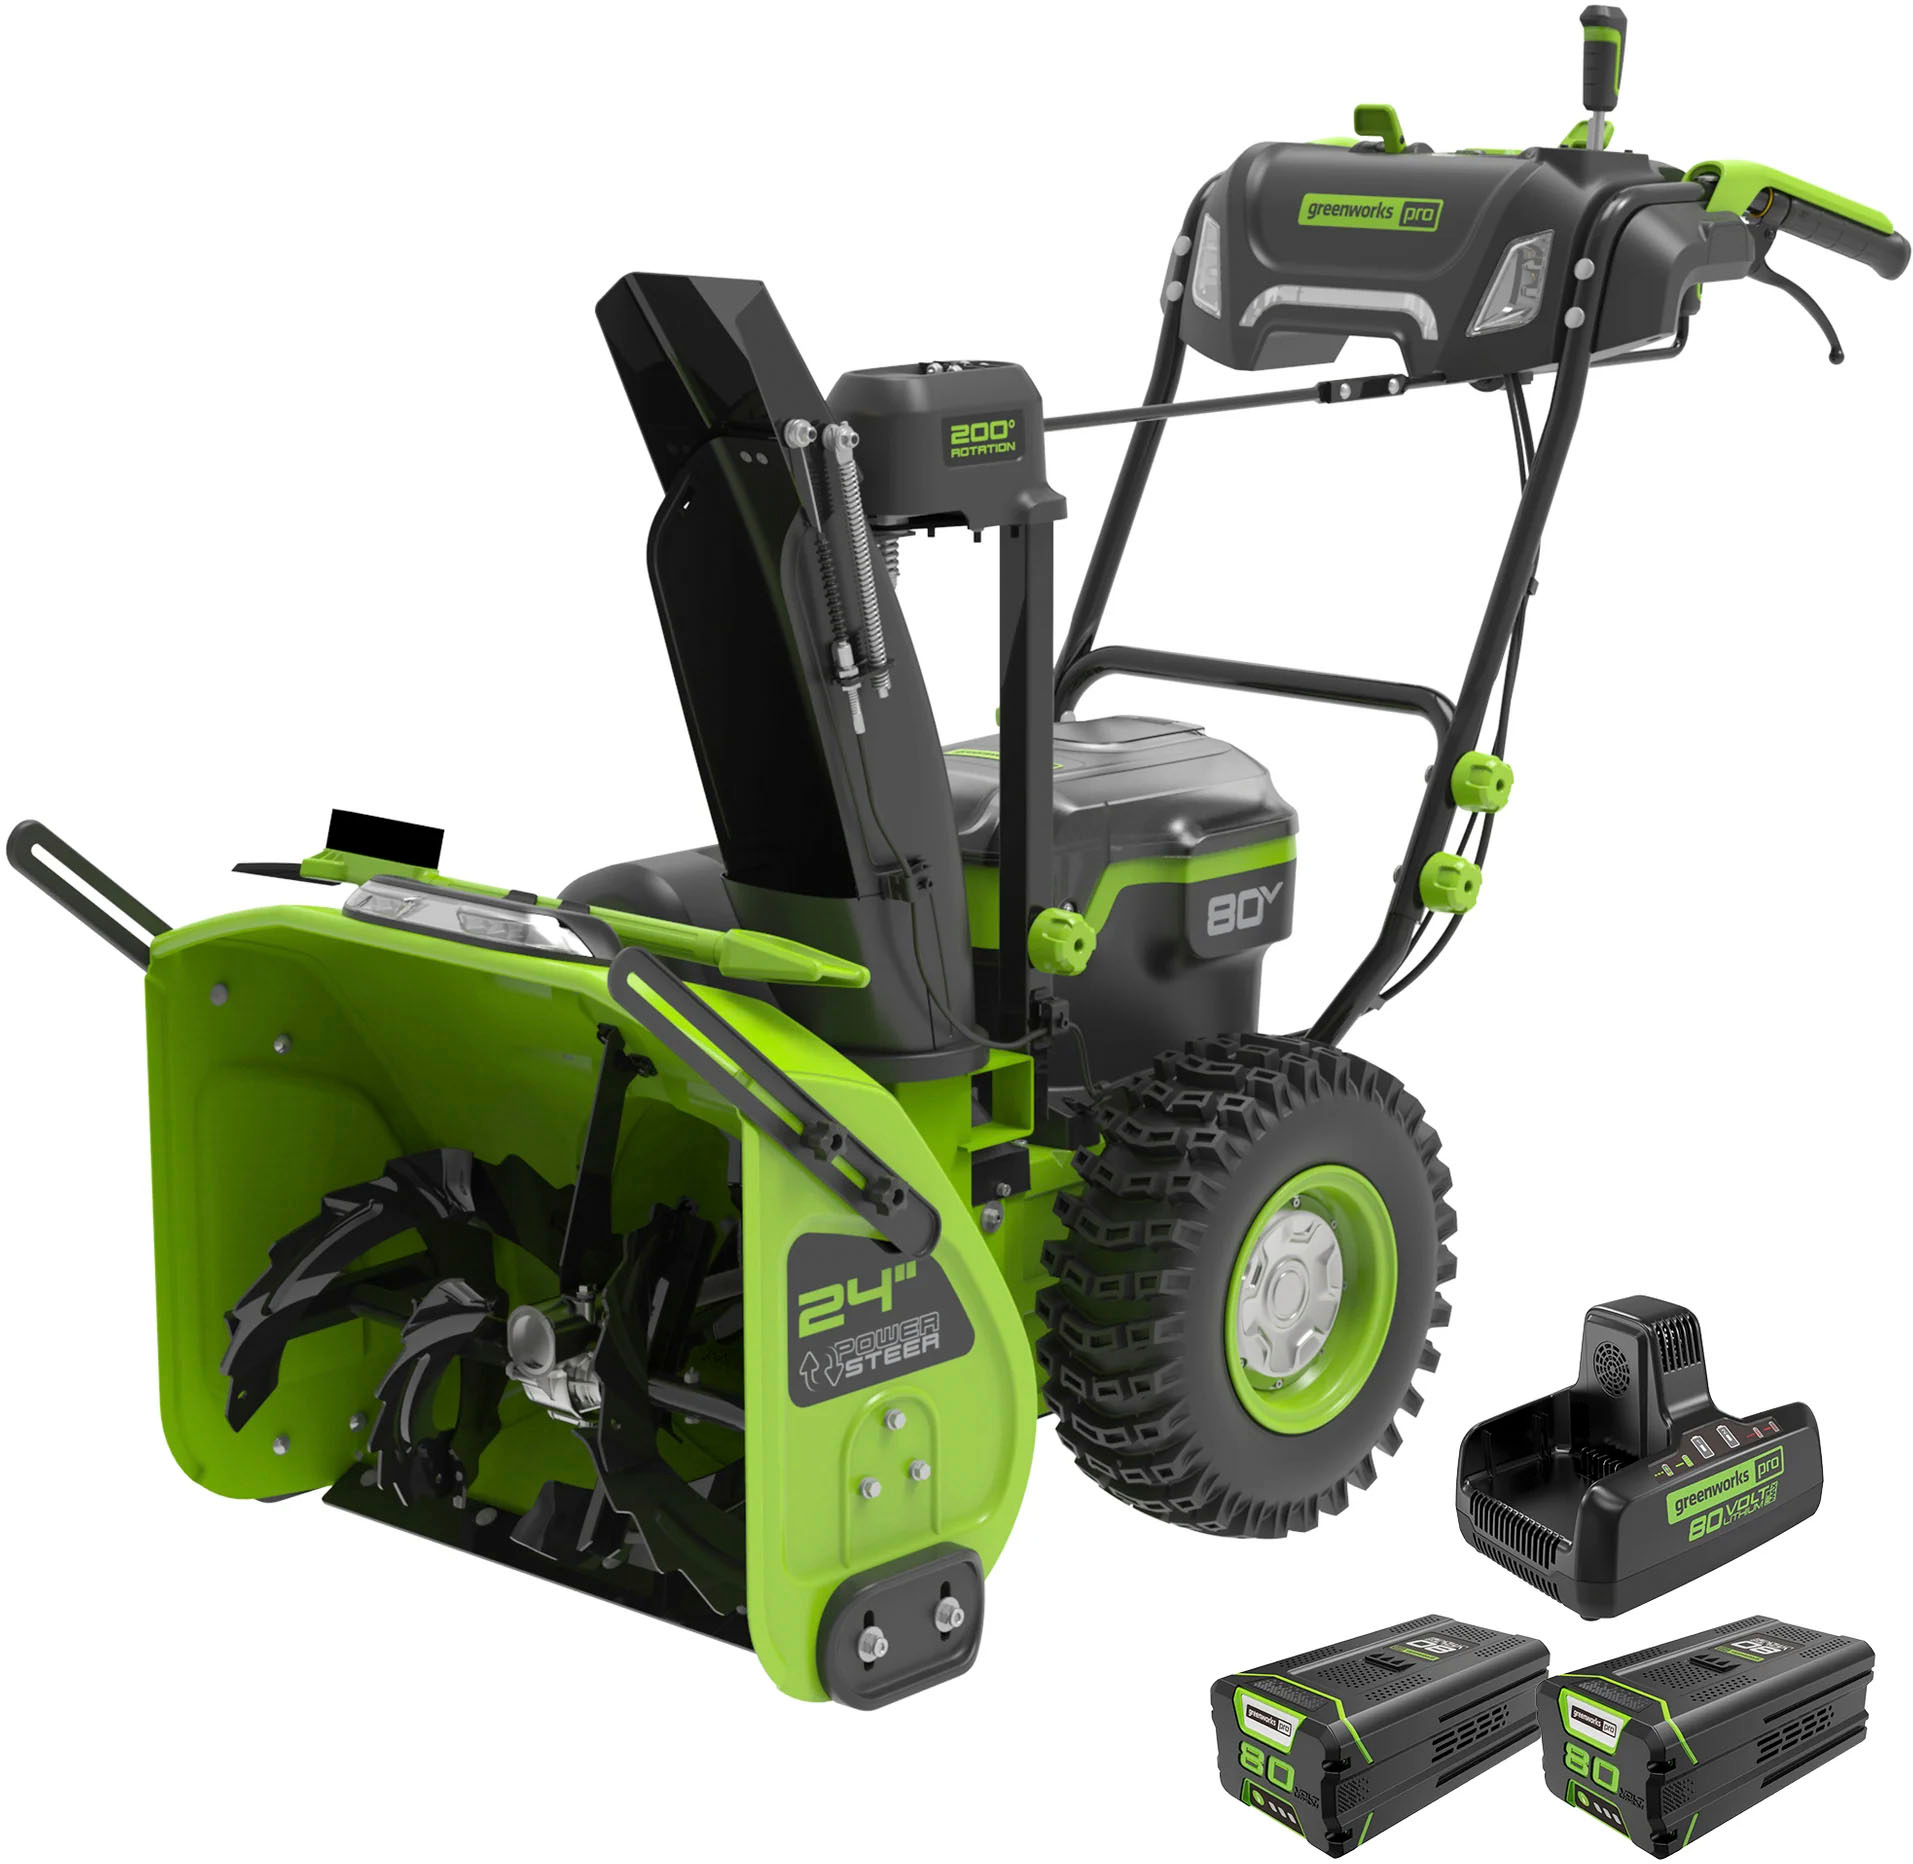 Greenworks 80V 24” Cordless Brushless Two-Stage Snow Blower with (2) 4.0  Batteries and Dual-Port Turbo Charger Green 2615702 Best Buy